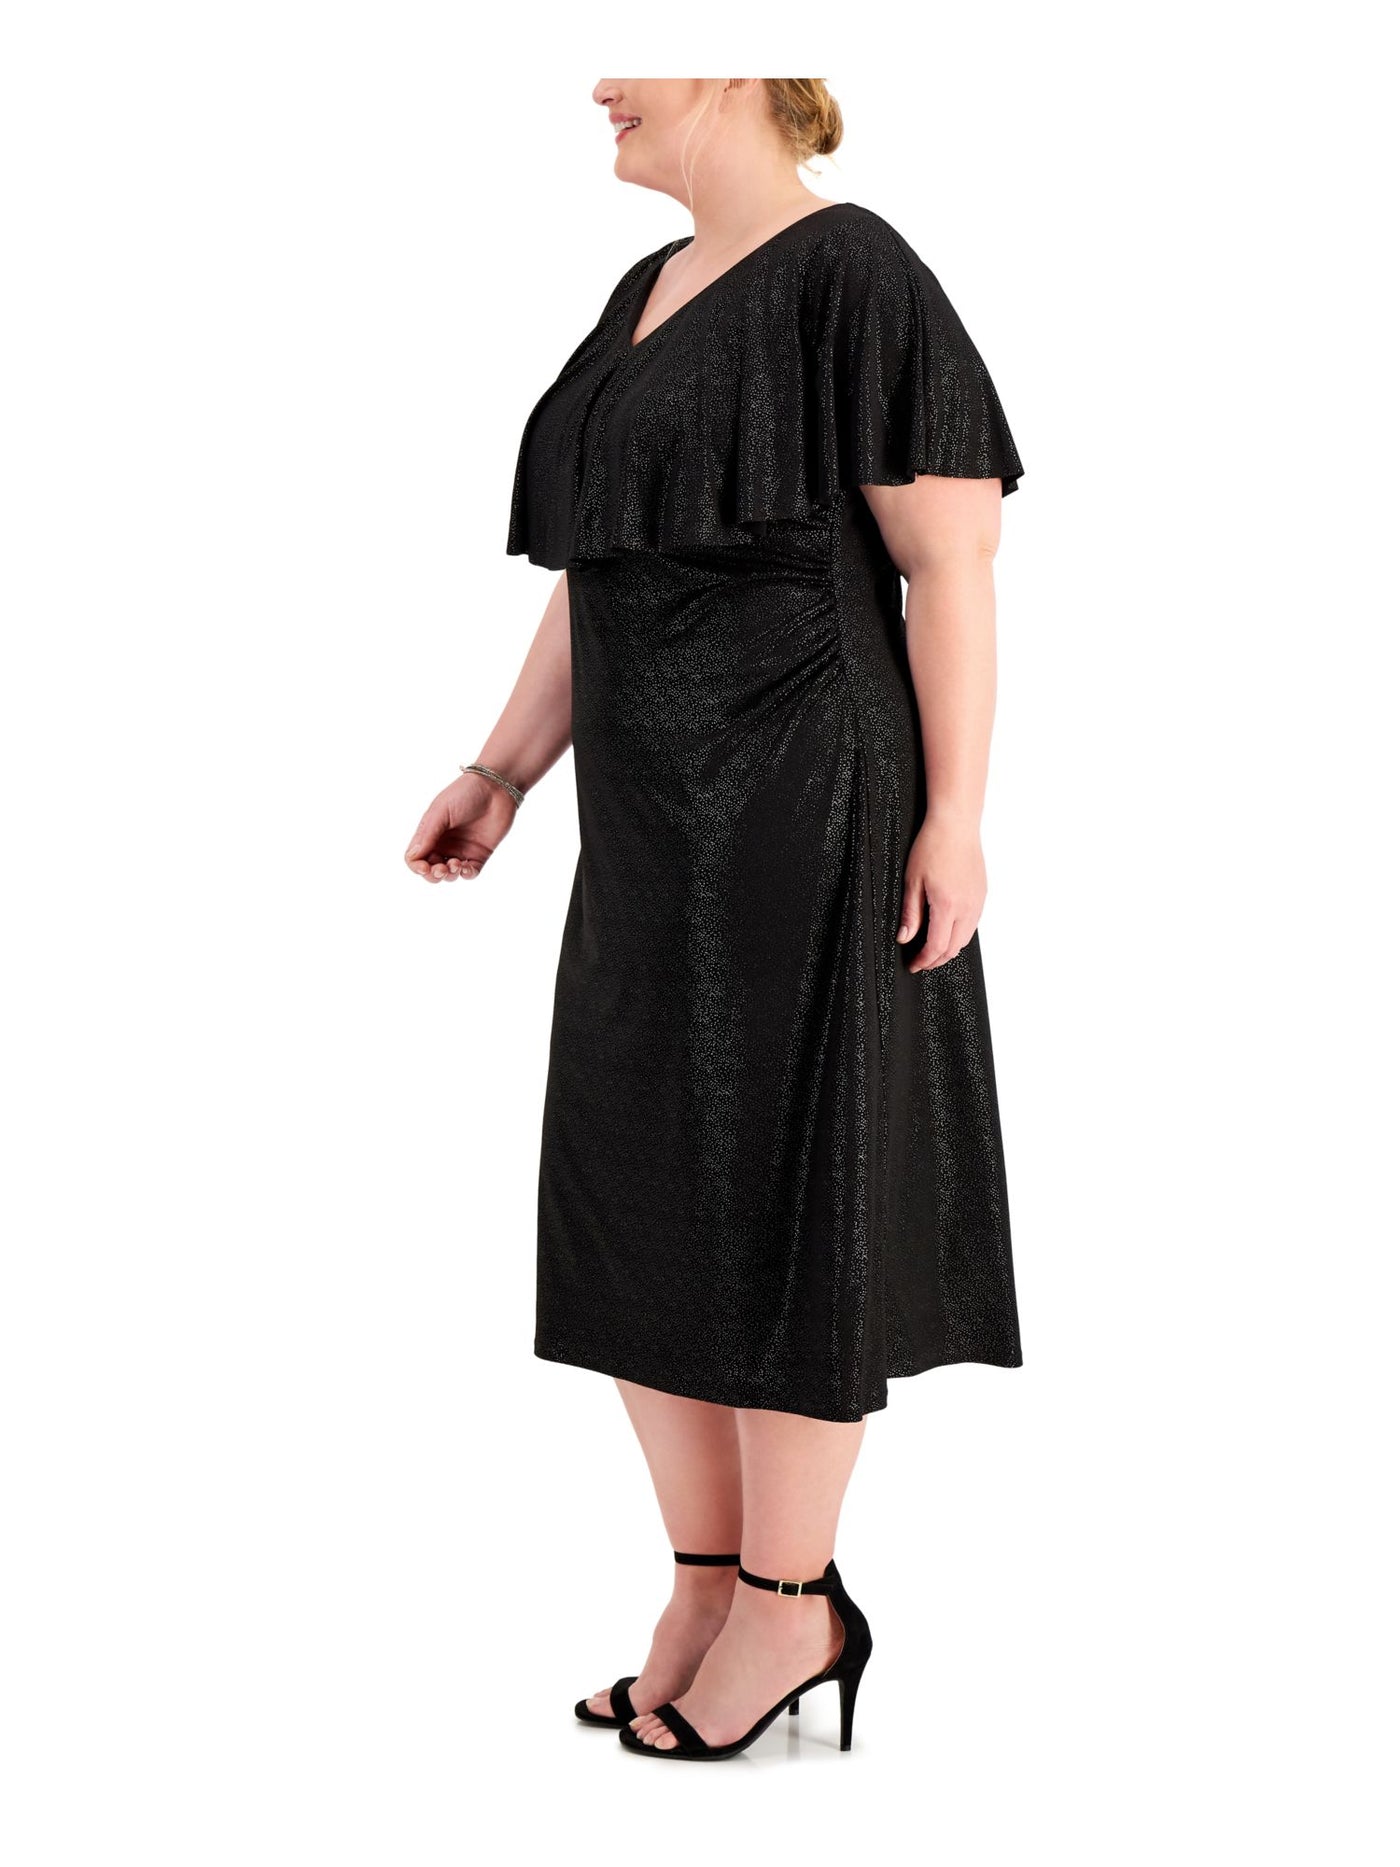 CONNECTED APPAREL Womens Black Stretch Flutter Sleeve V Neck Midi Cocktail A-Line Dress Plus 24W